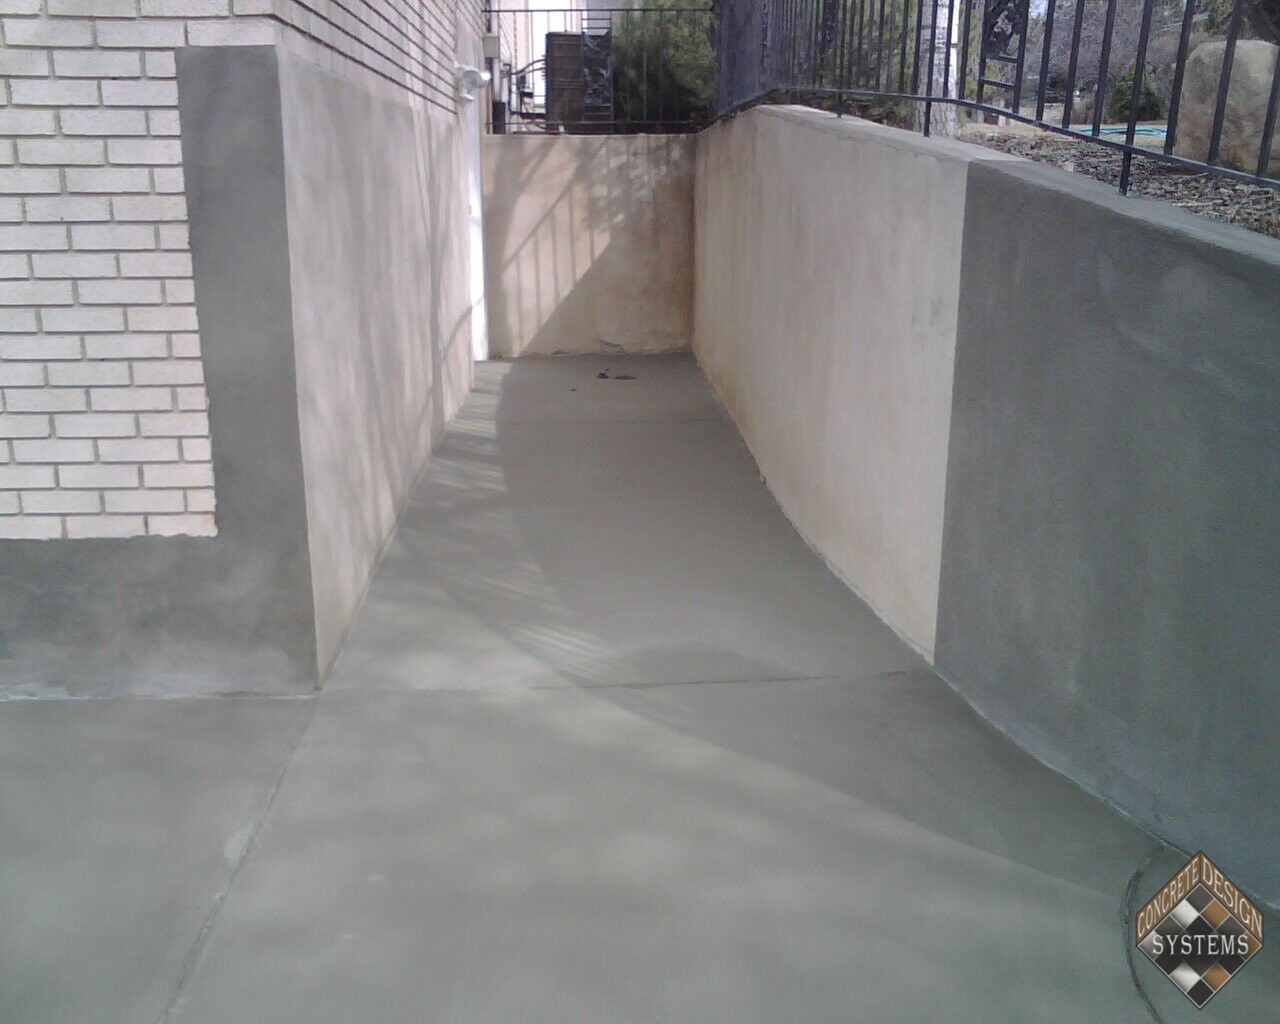 Driveway-Overlay-In-Plain-Gray-With-Retaining-Wall